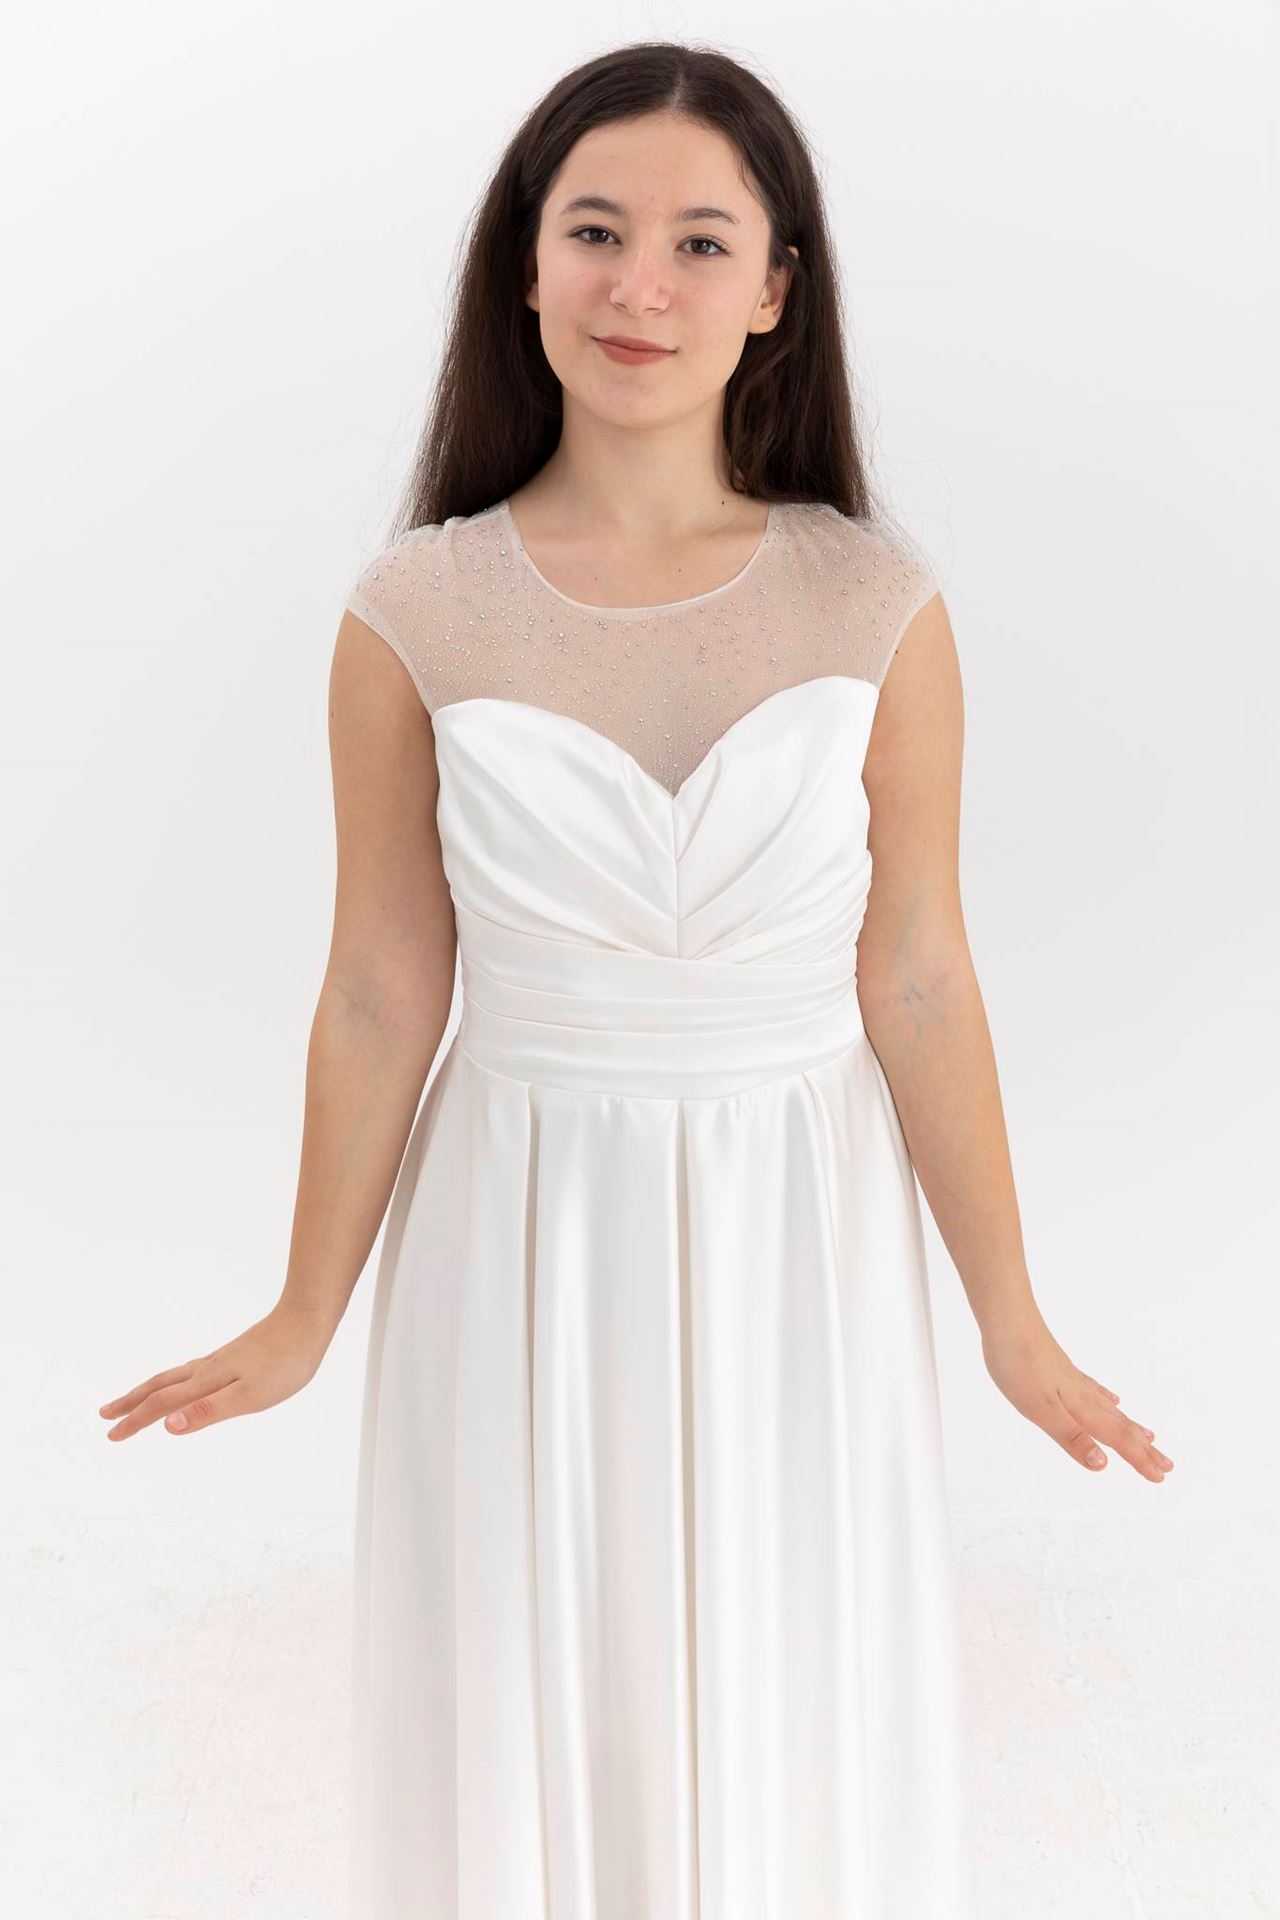 Minerva 12-16 Years Old Girl Dress 50005 Off White